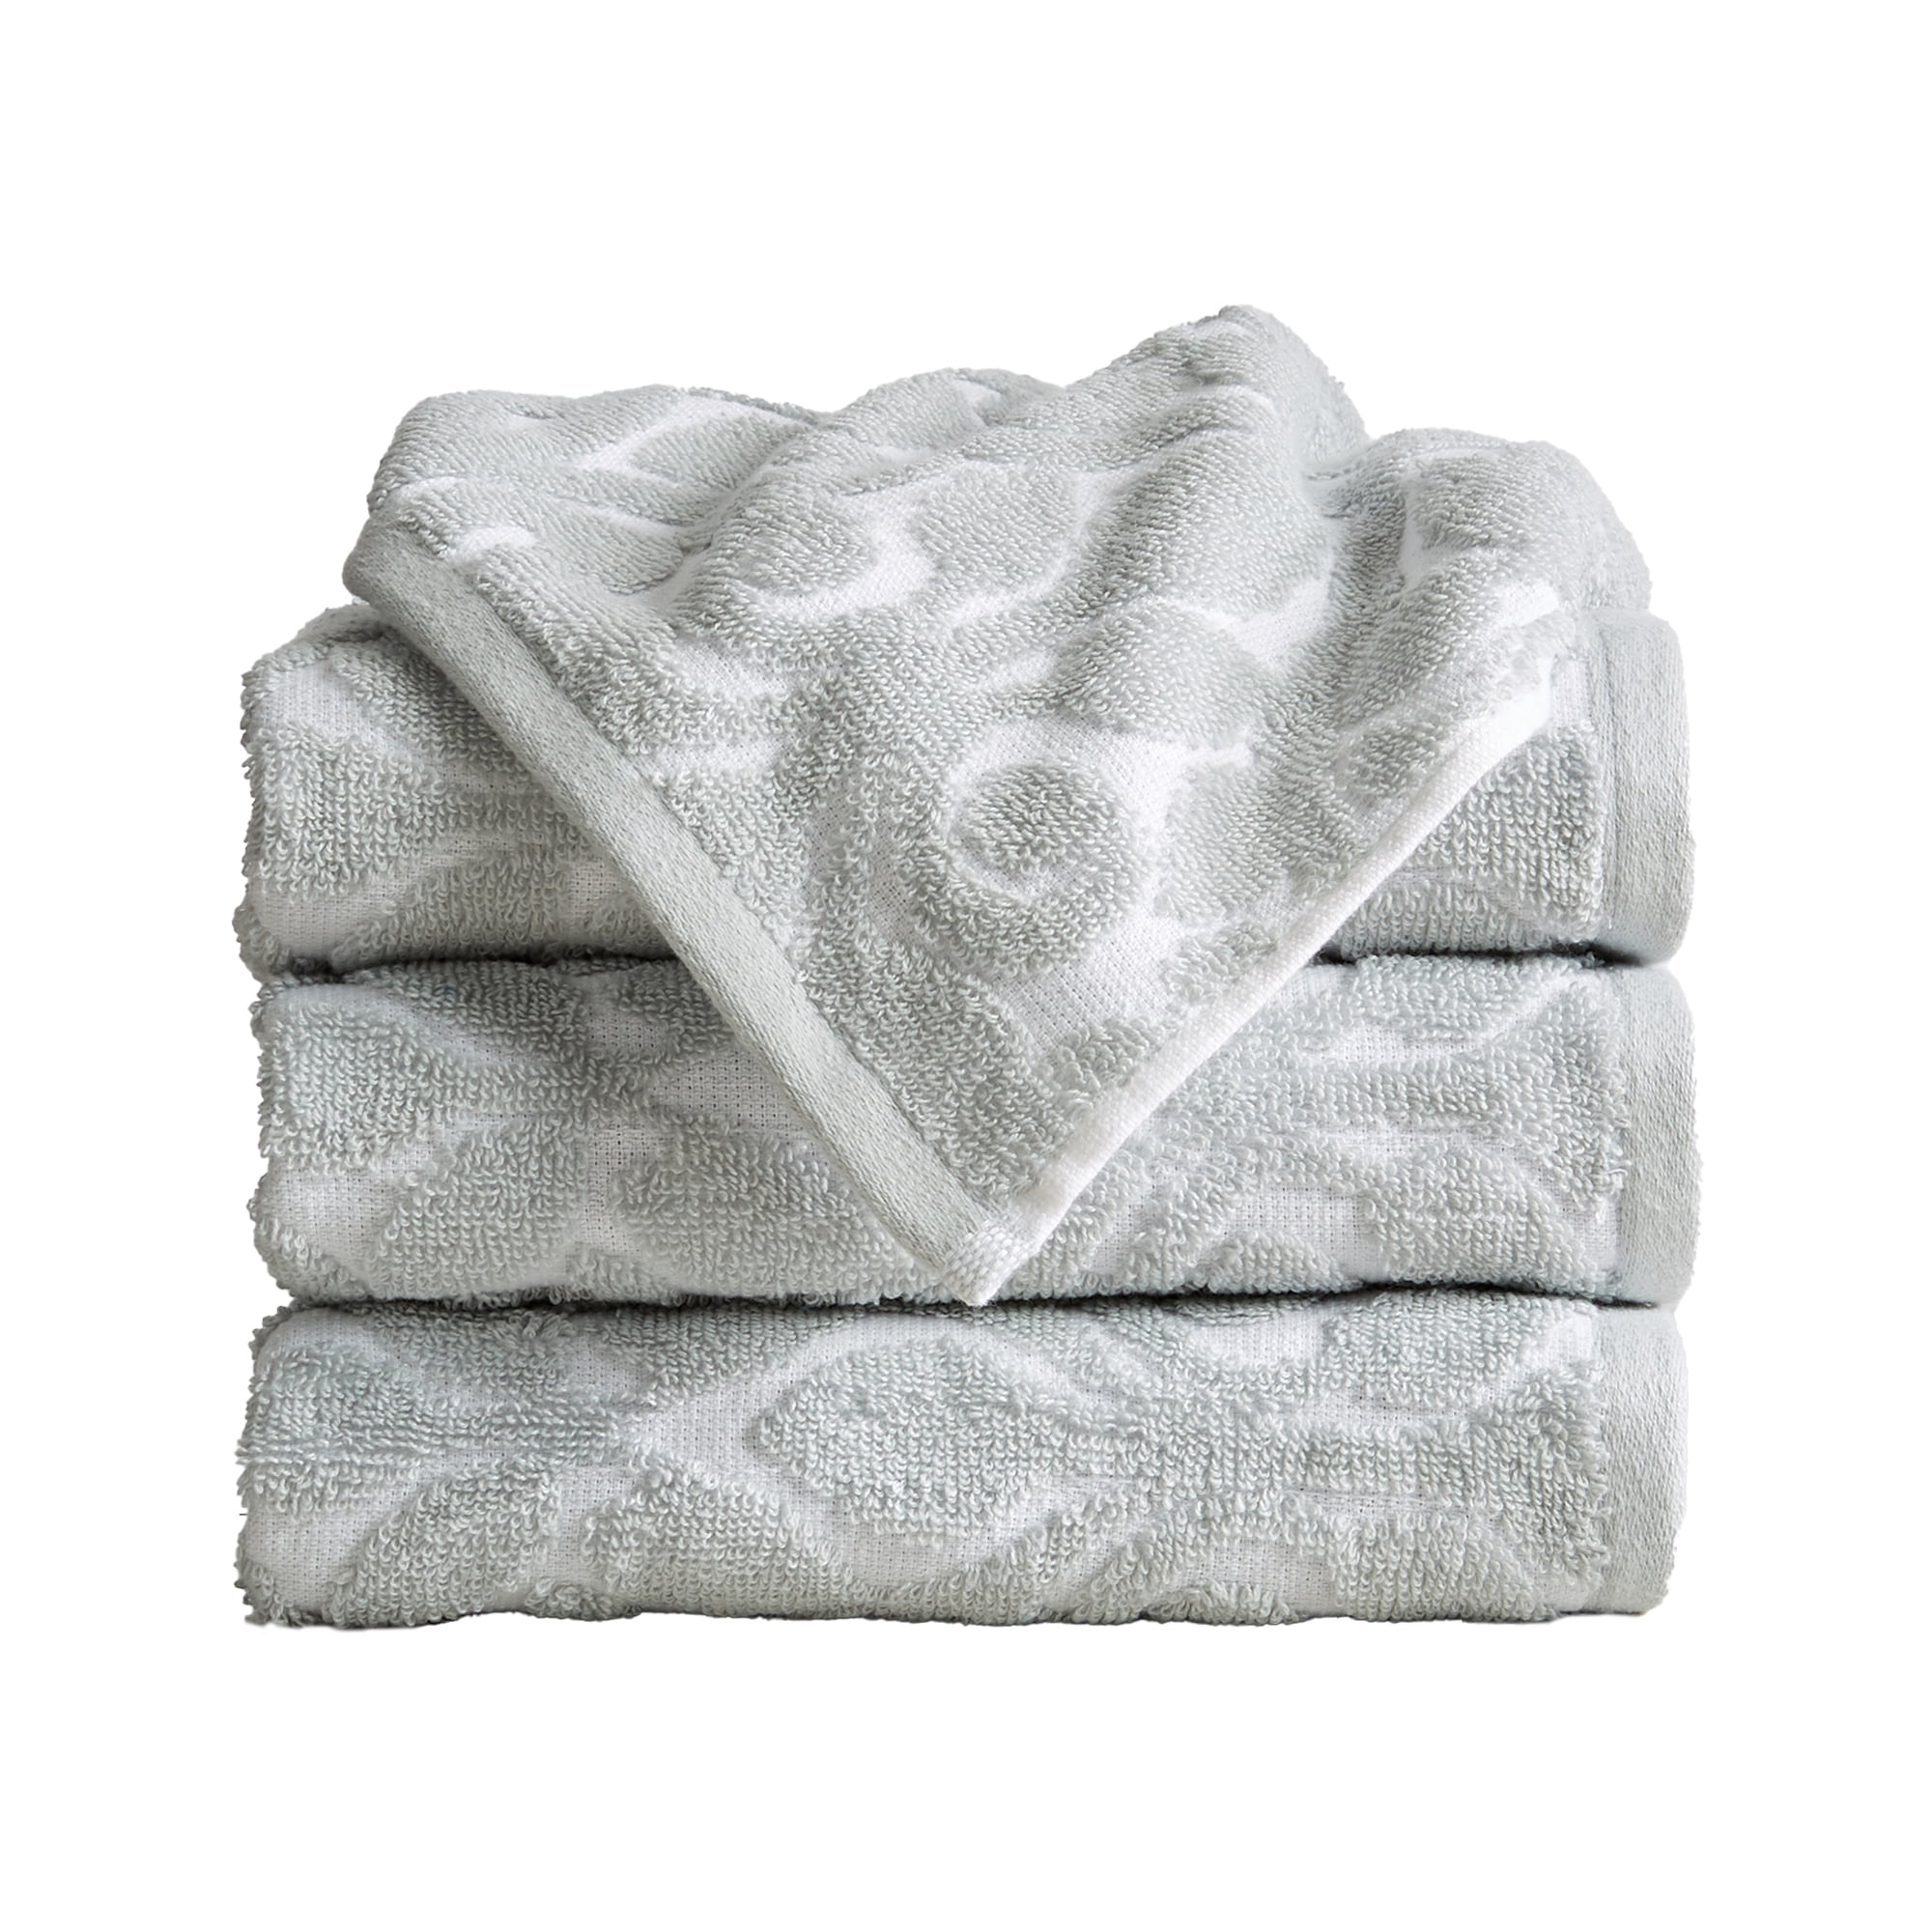 Stunning Velvet Cotton Grey Hand Towels With Grey Lace, New Home